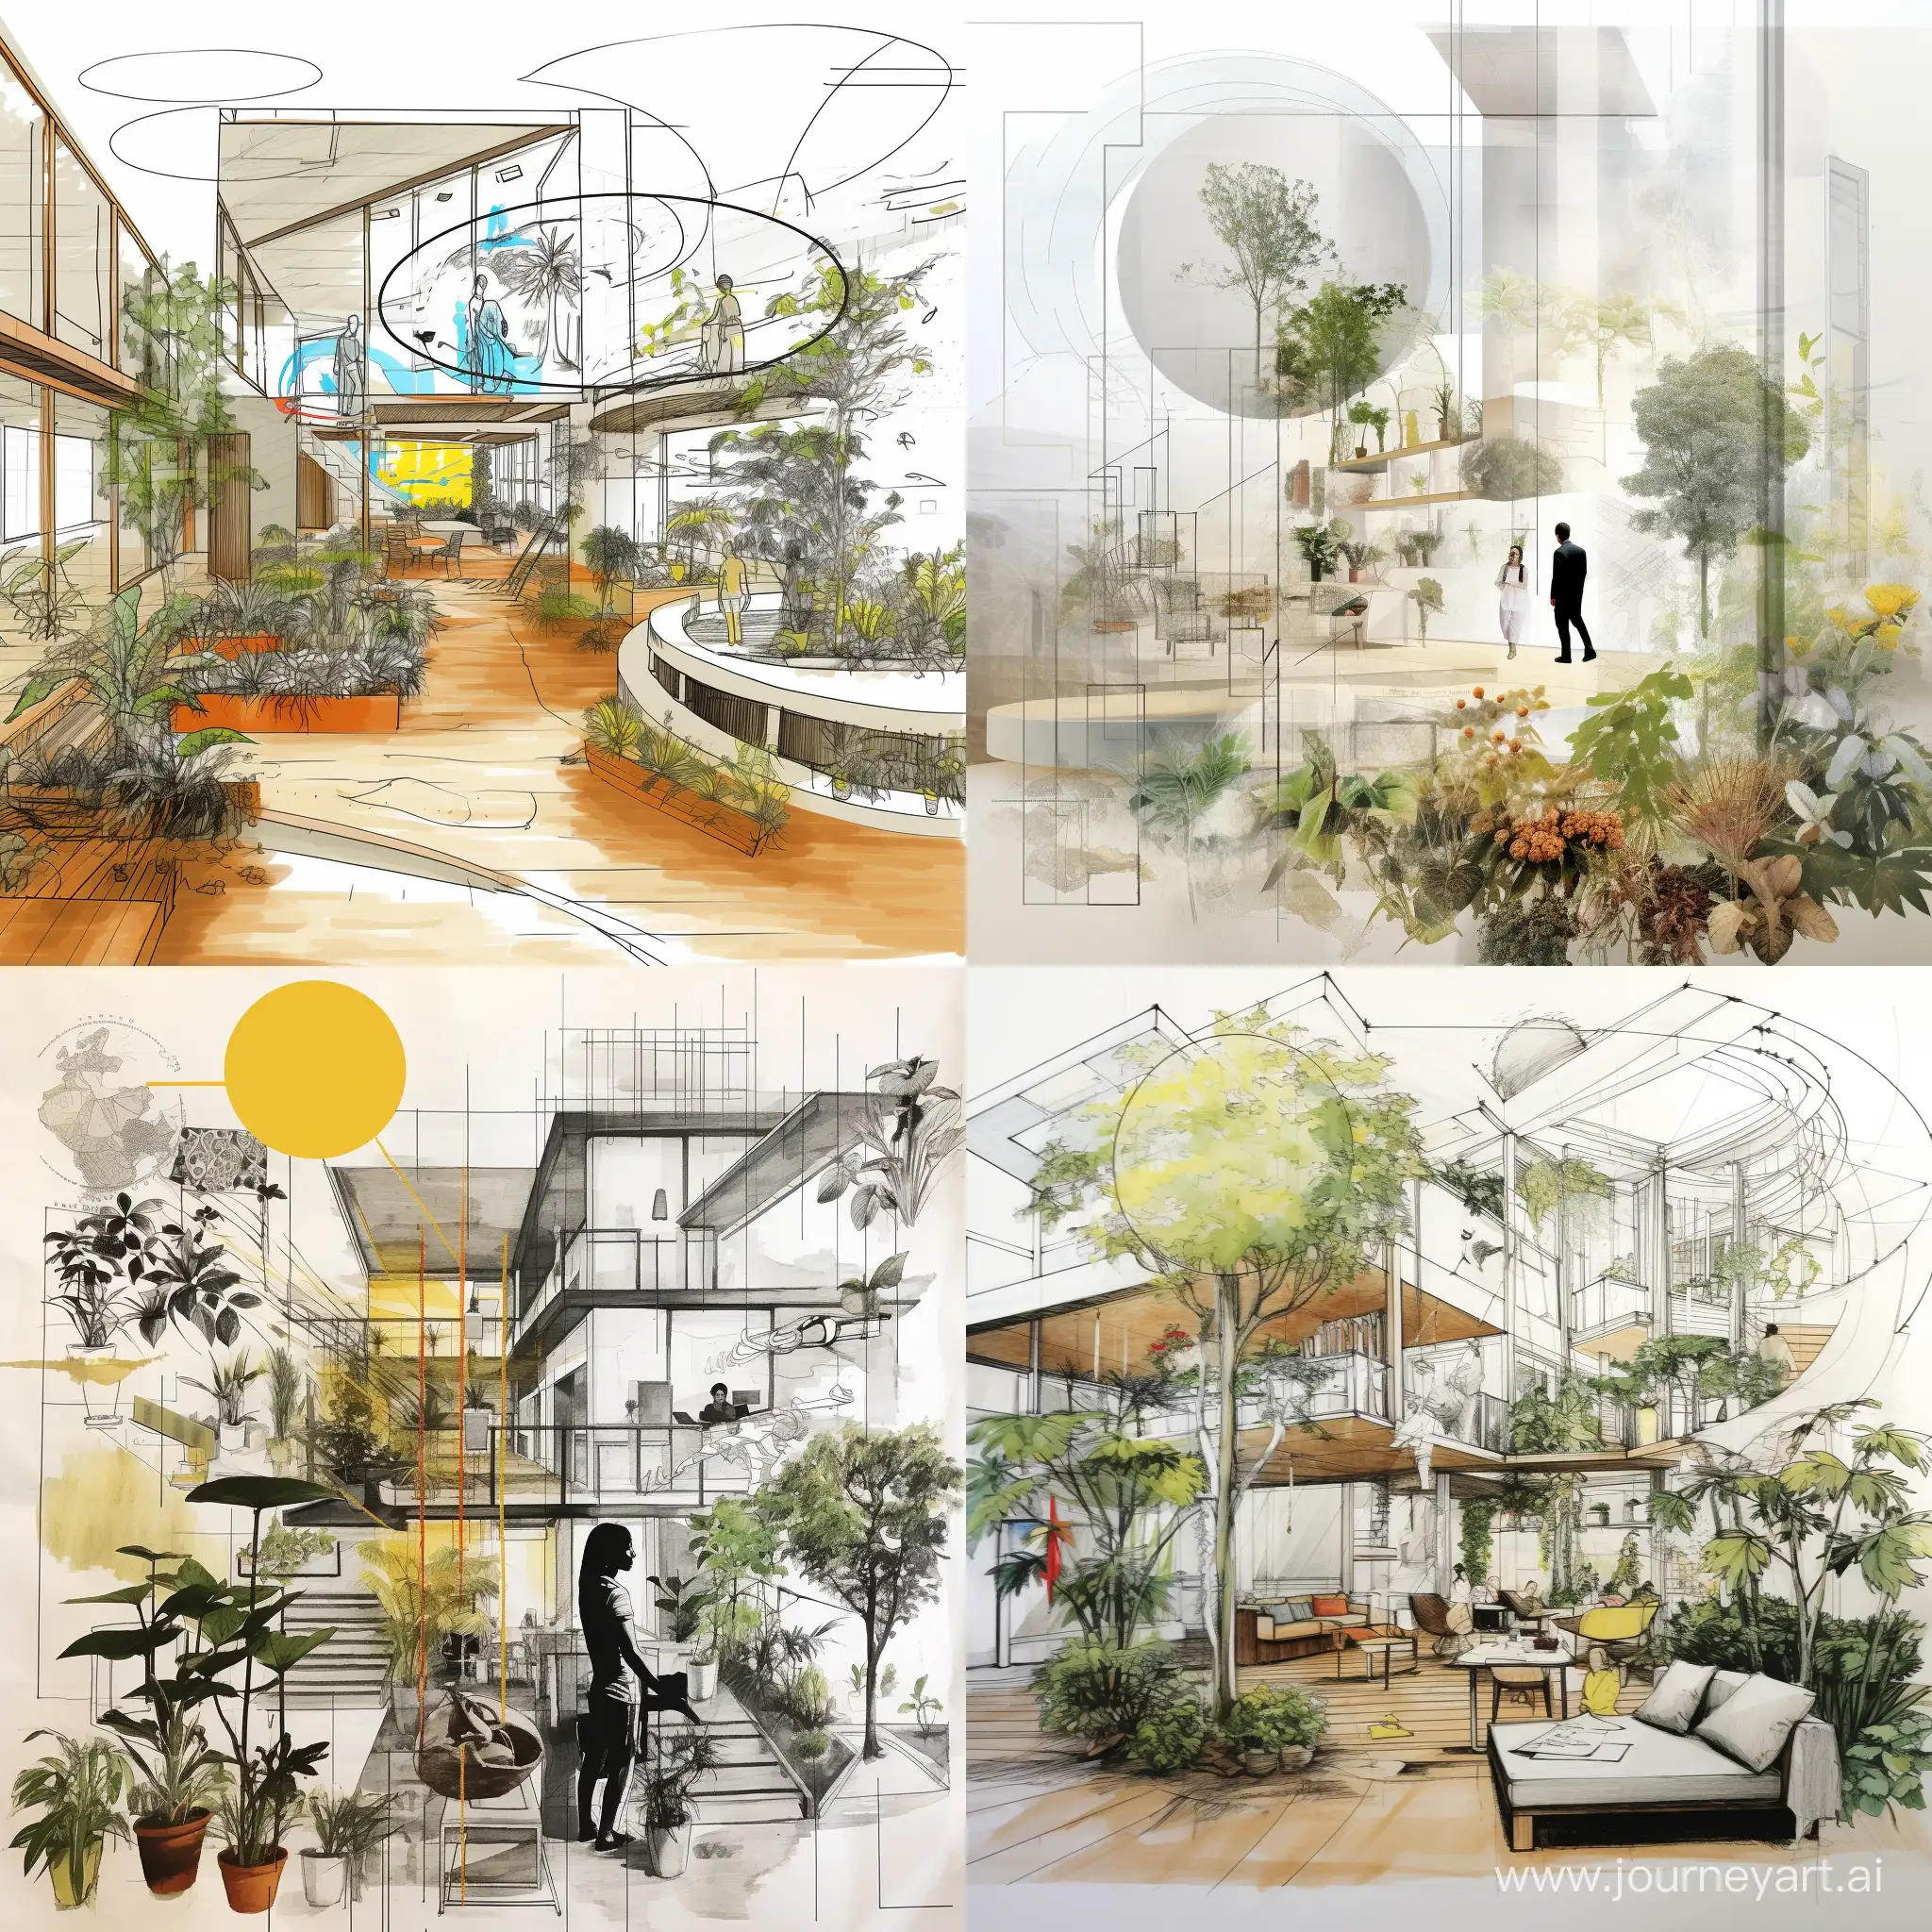 a concept collage like a diagram with few pictures and line drawings for a design project with inside outside concepts and open to sky atrium for rehabilitation centre with plants and a safe and healthy hospital 
showcasing humans with sketch and collage